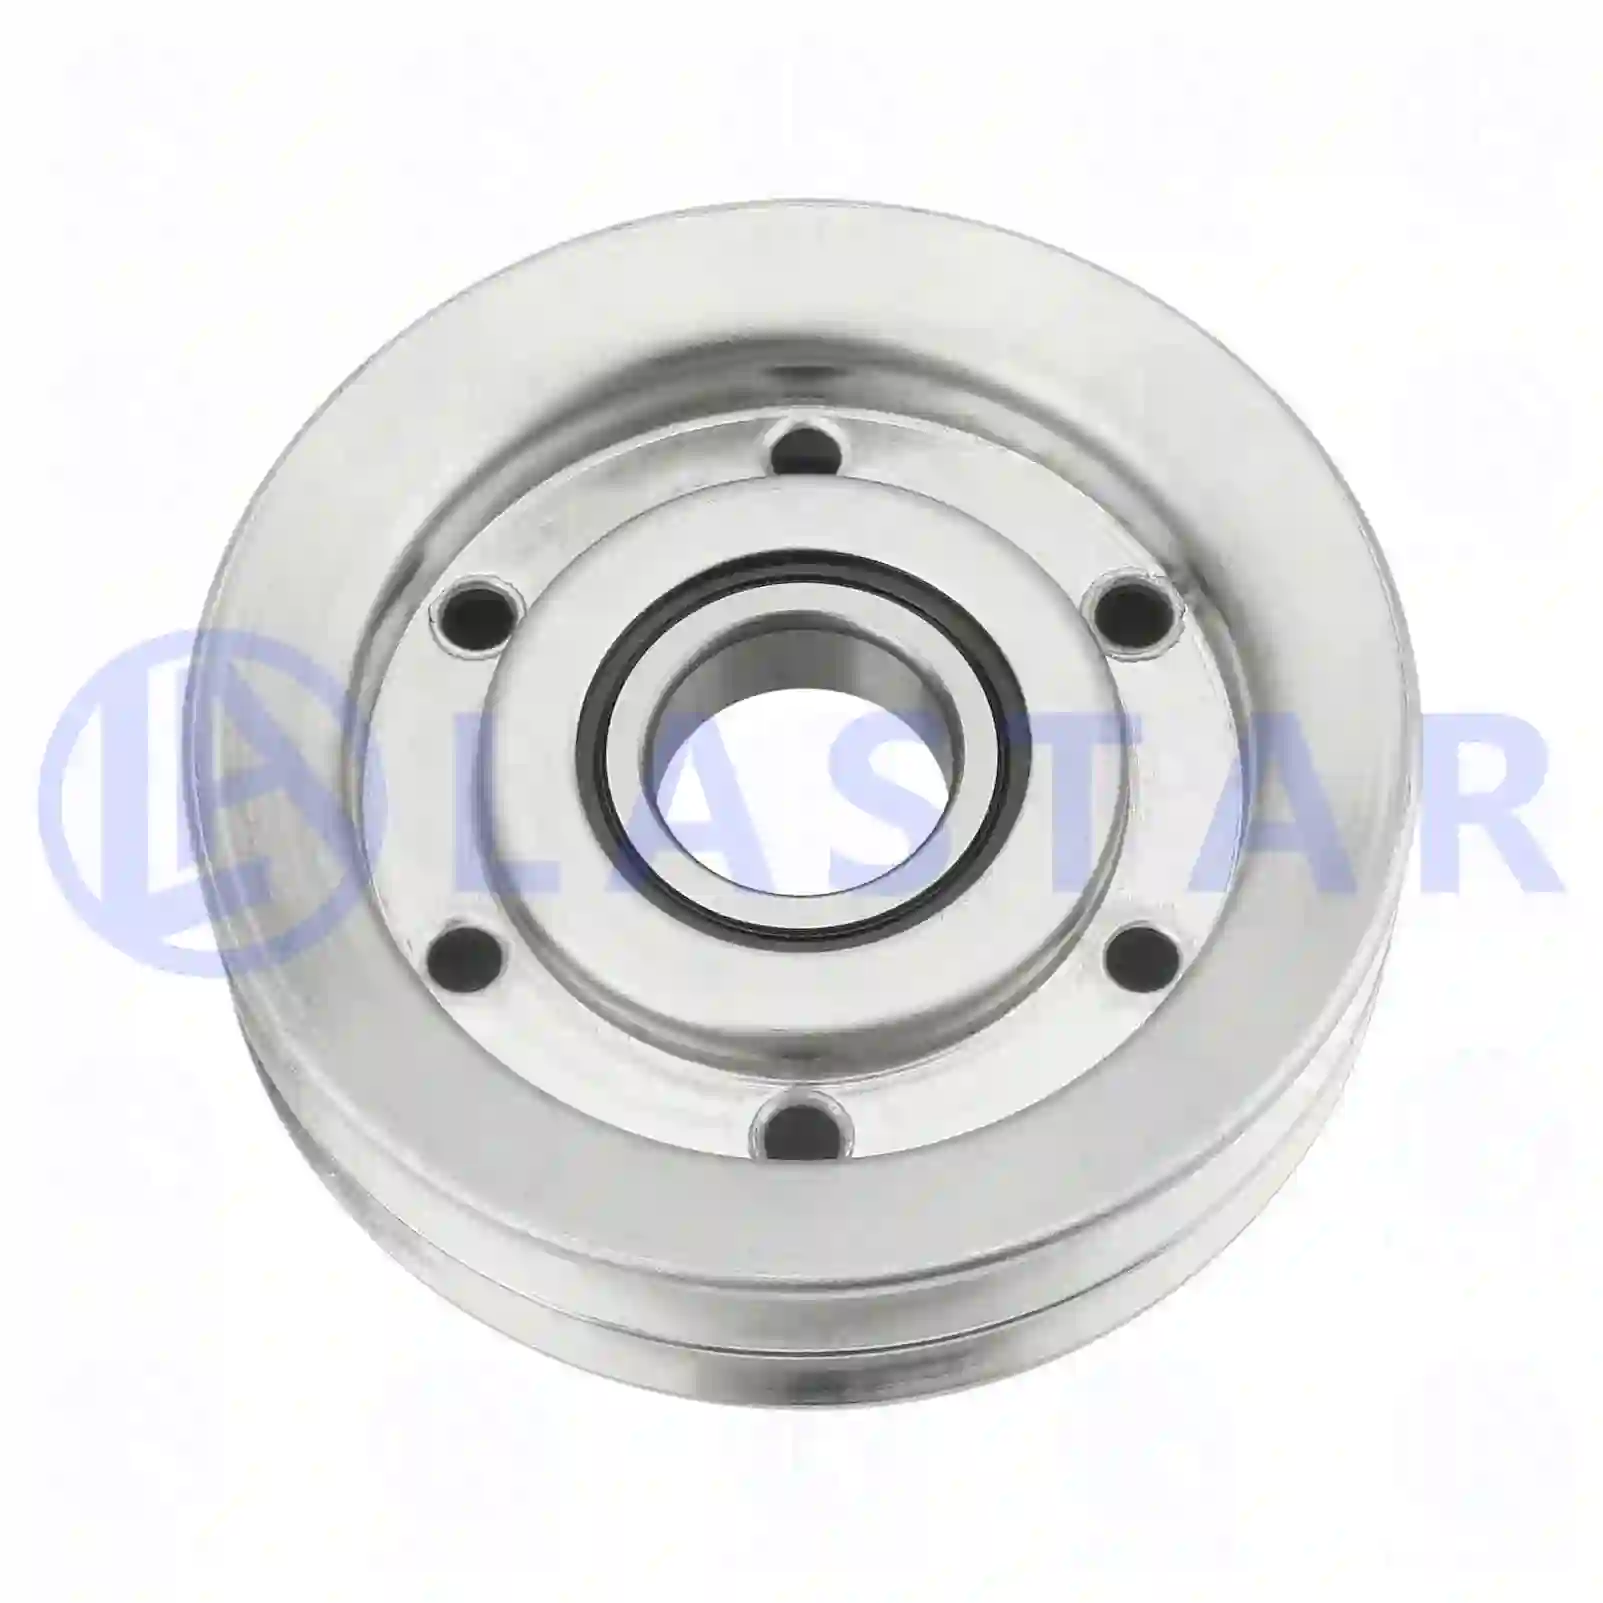 Pulley, 77708004, 7401661878, 1661878, 465328, ZG01914-0008, , , ||  77708004 Lastar Spare Part | Truck Spare Parts, Auotomotive Spare Parts Pulley, 77708004, 7401661878, 1661878, 465328, ZG01914-0008, , , ||  77708004 Lastar Spare Part | Truck Spare Parts, Auotomotive Spare Parts